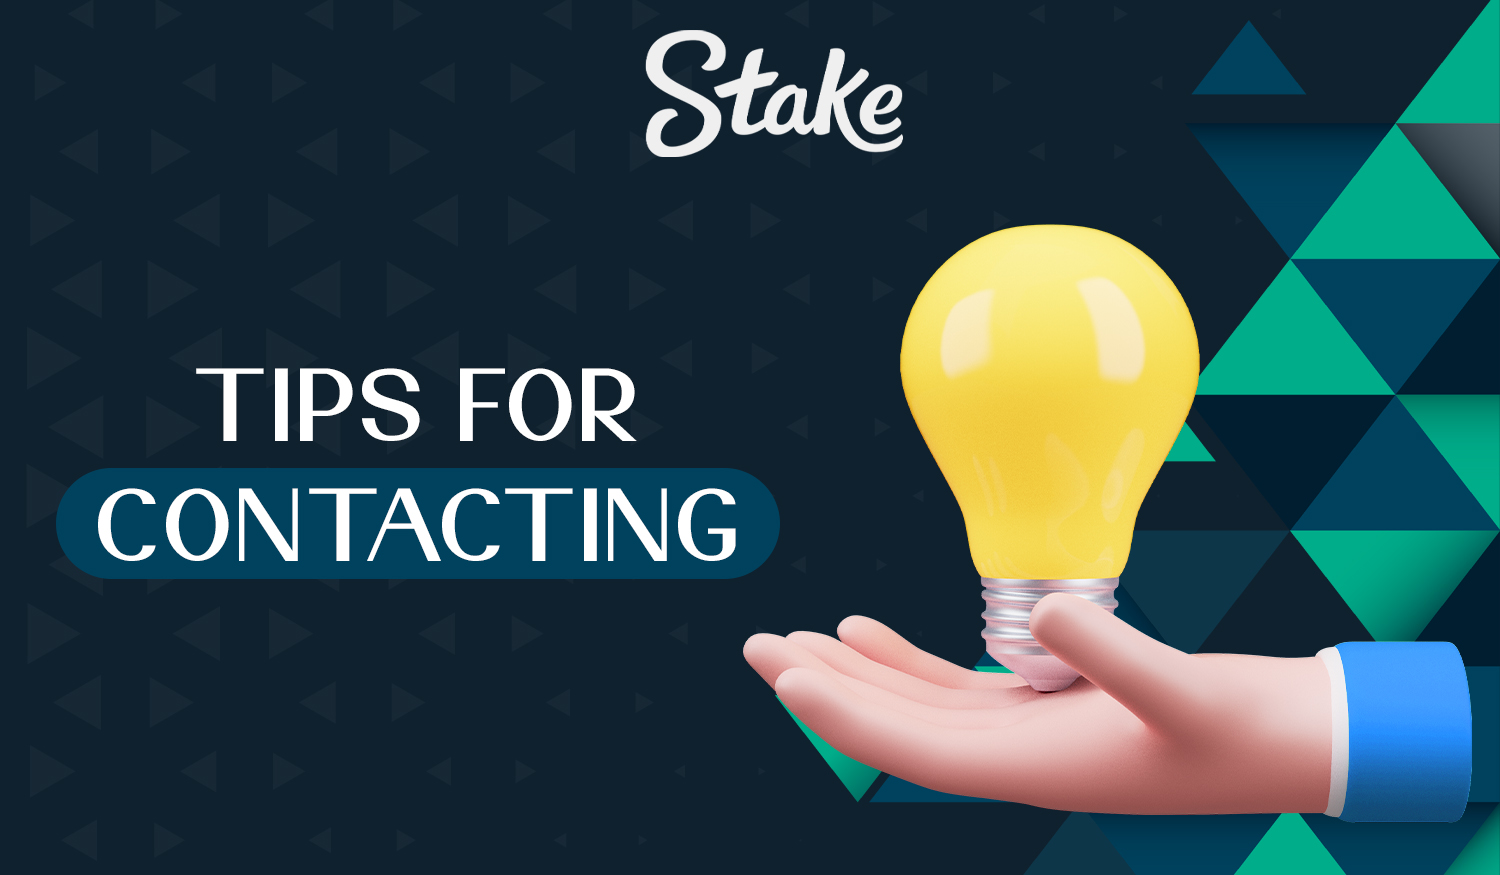 Top tips for Stake users to communicate with Stake's support team in the most efficient way